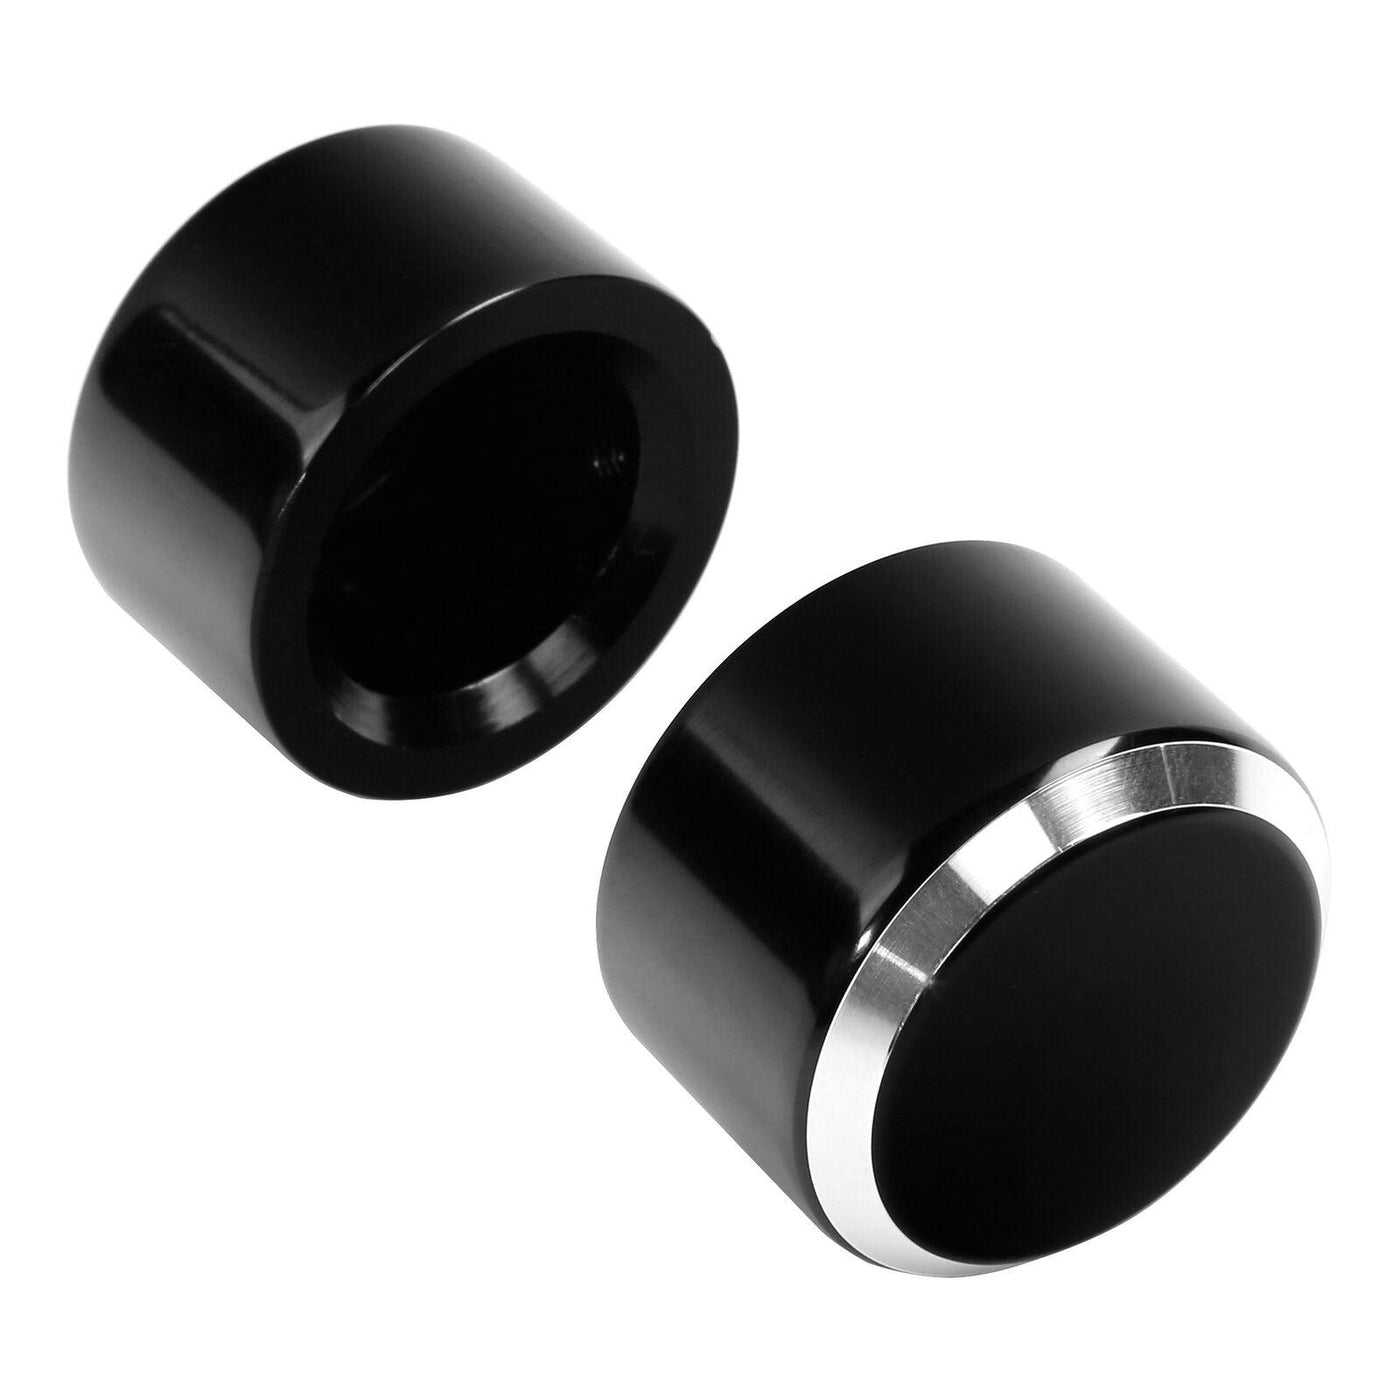 Black Front Axle Nut Covers Bolt Kit Fit For Harley Touring Dyna Softail - Moto Life Products